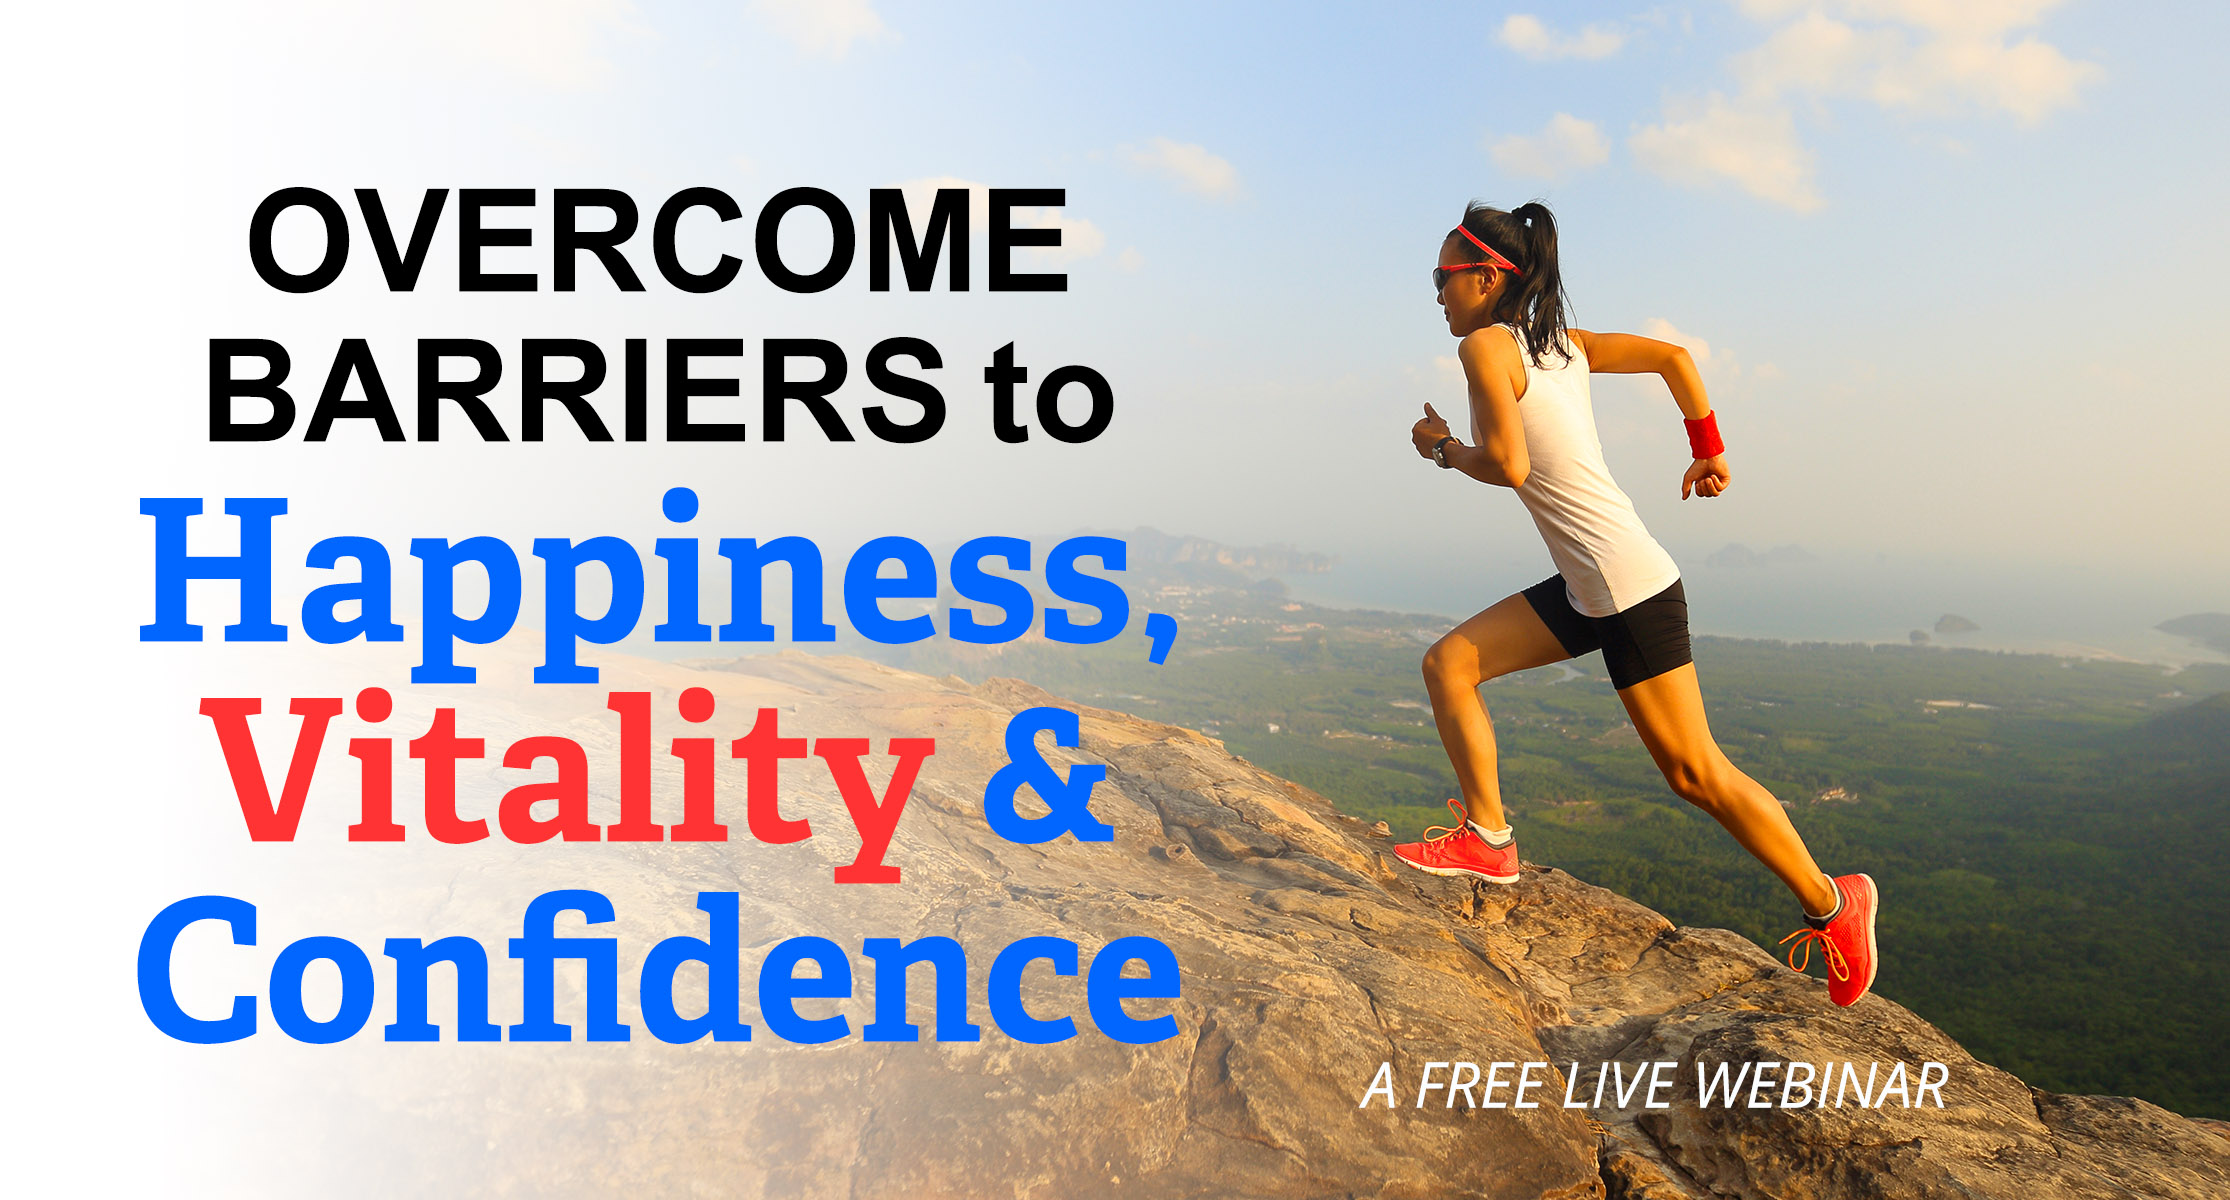 Overcome Barriers to Happiness, Vitality & Confidence